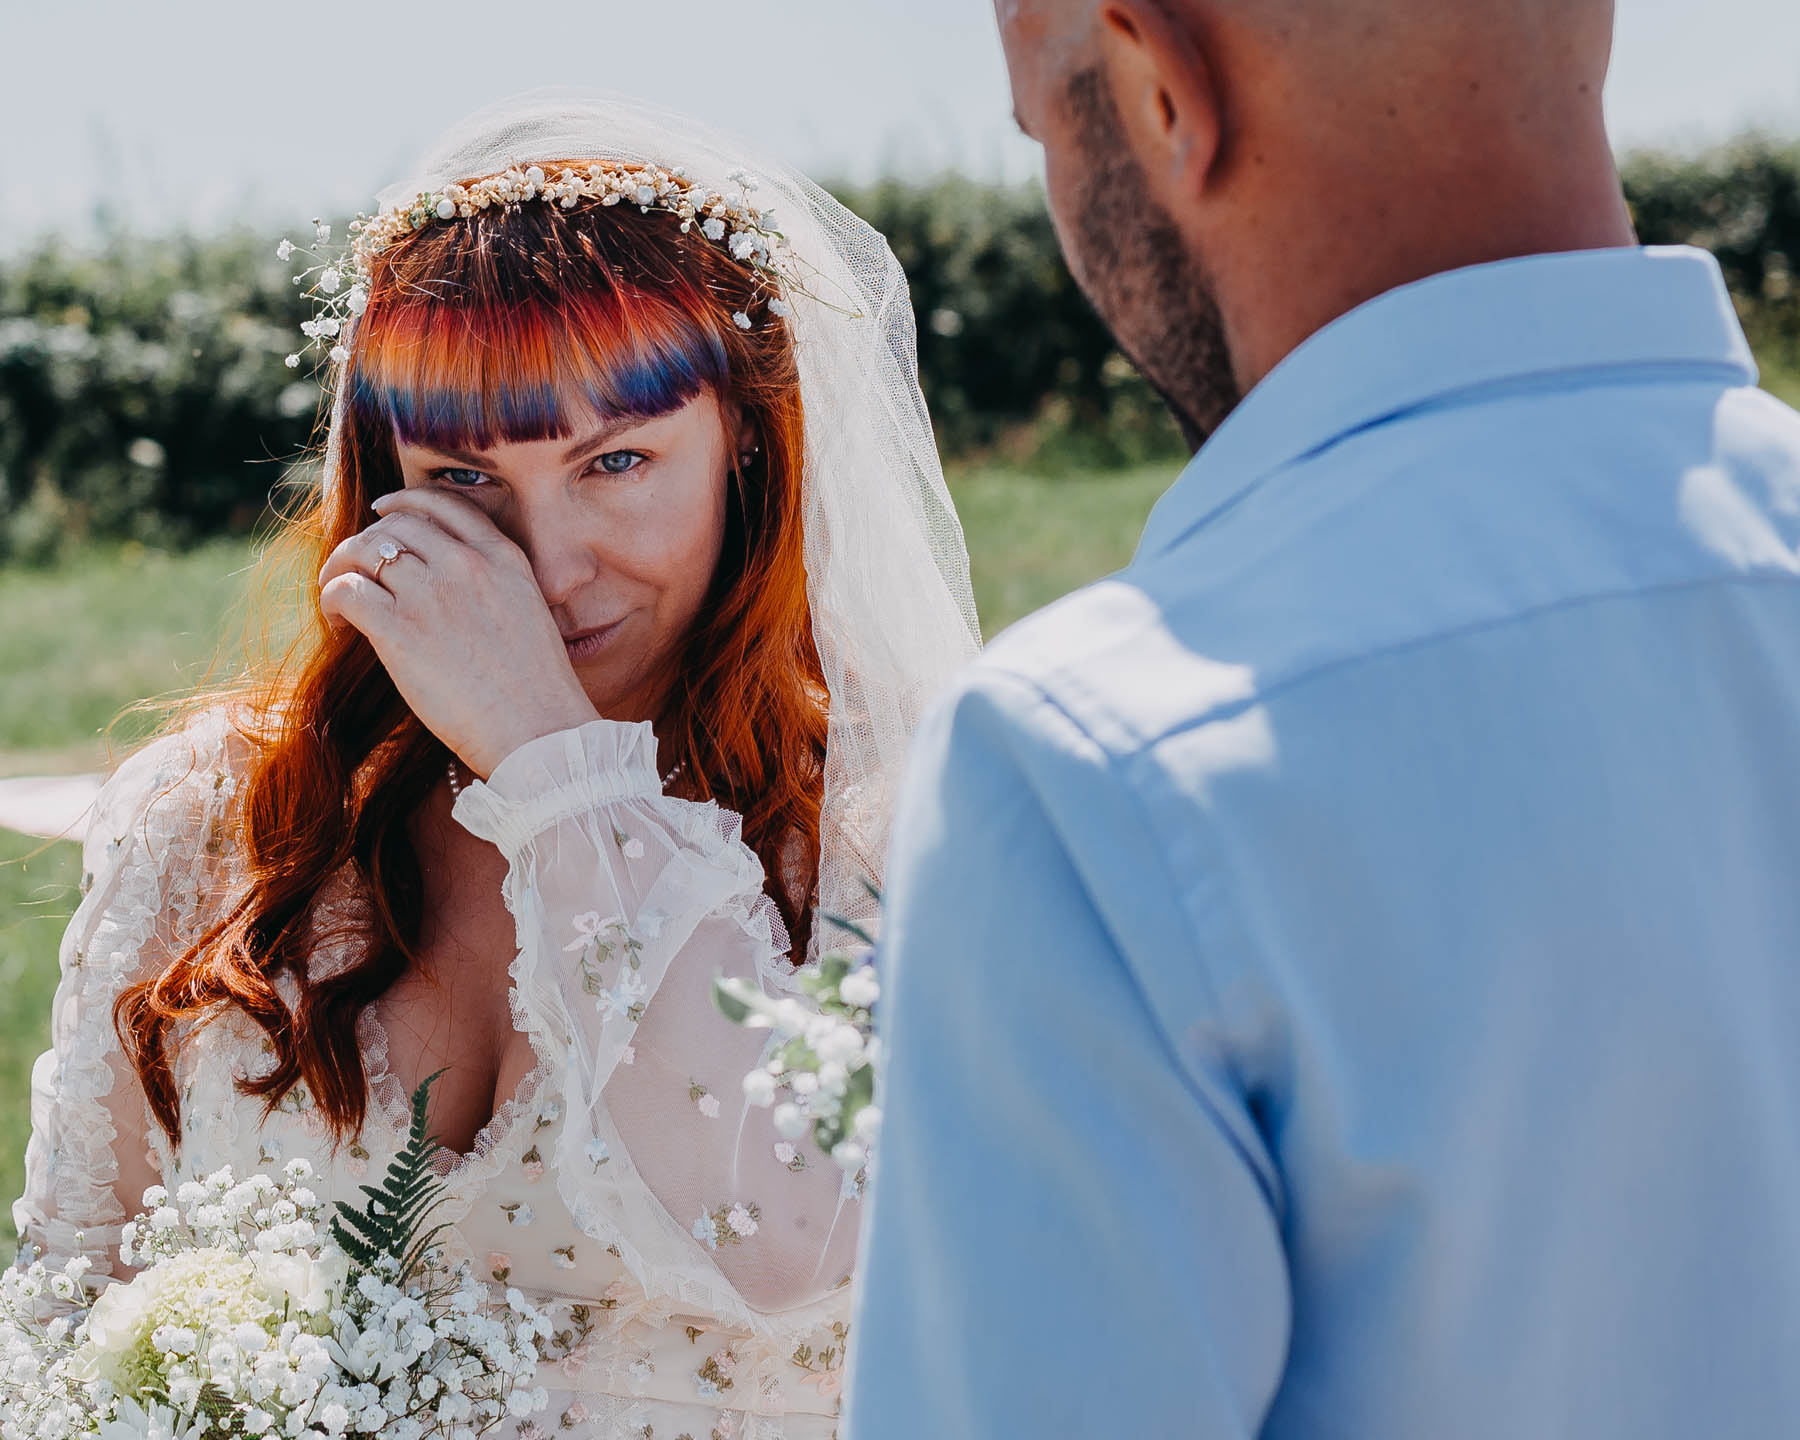 Tears in the eyes of the bride before the handfasting ceremony